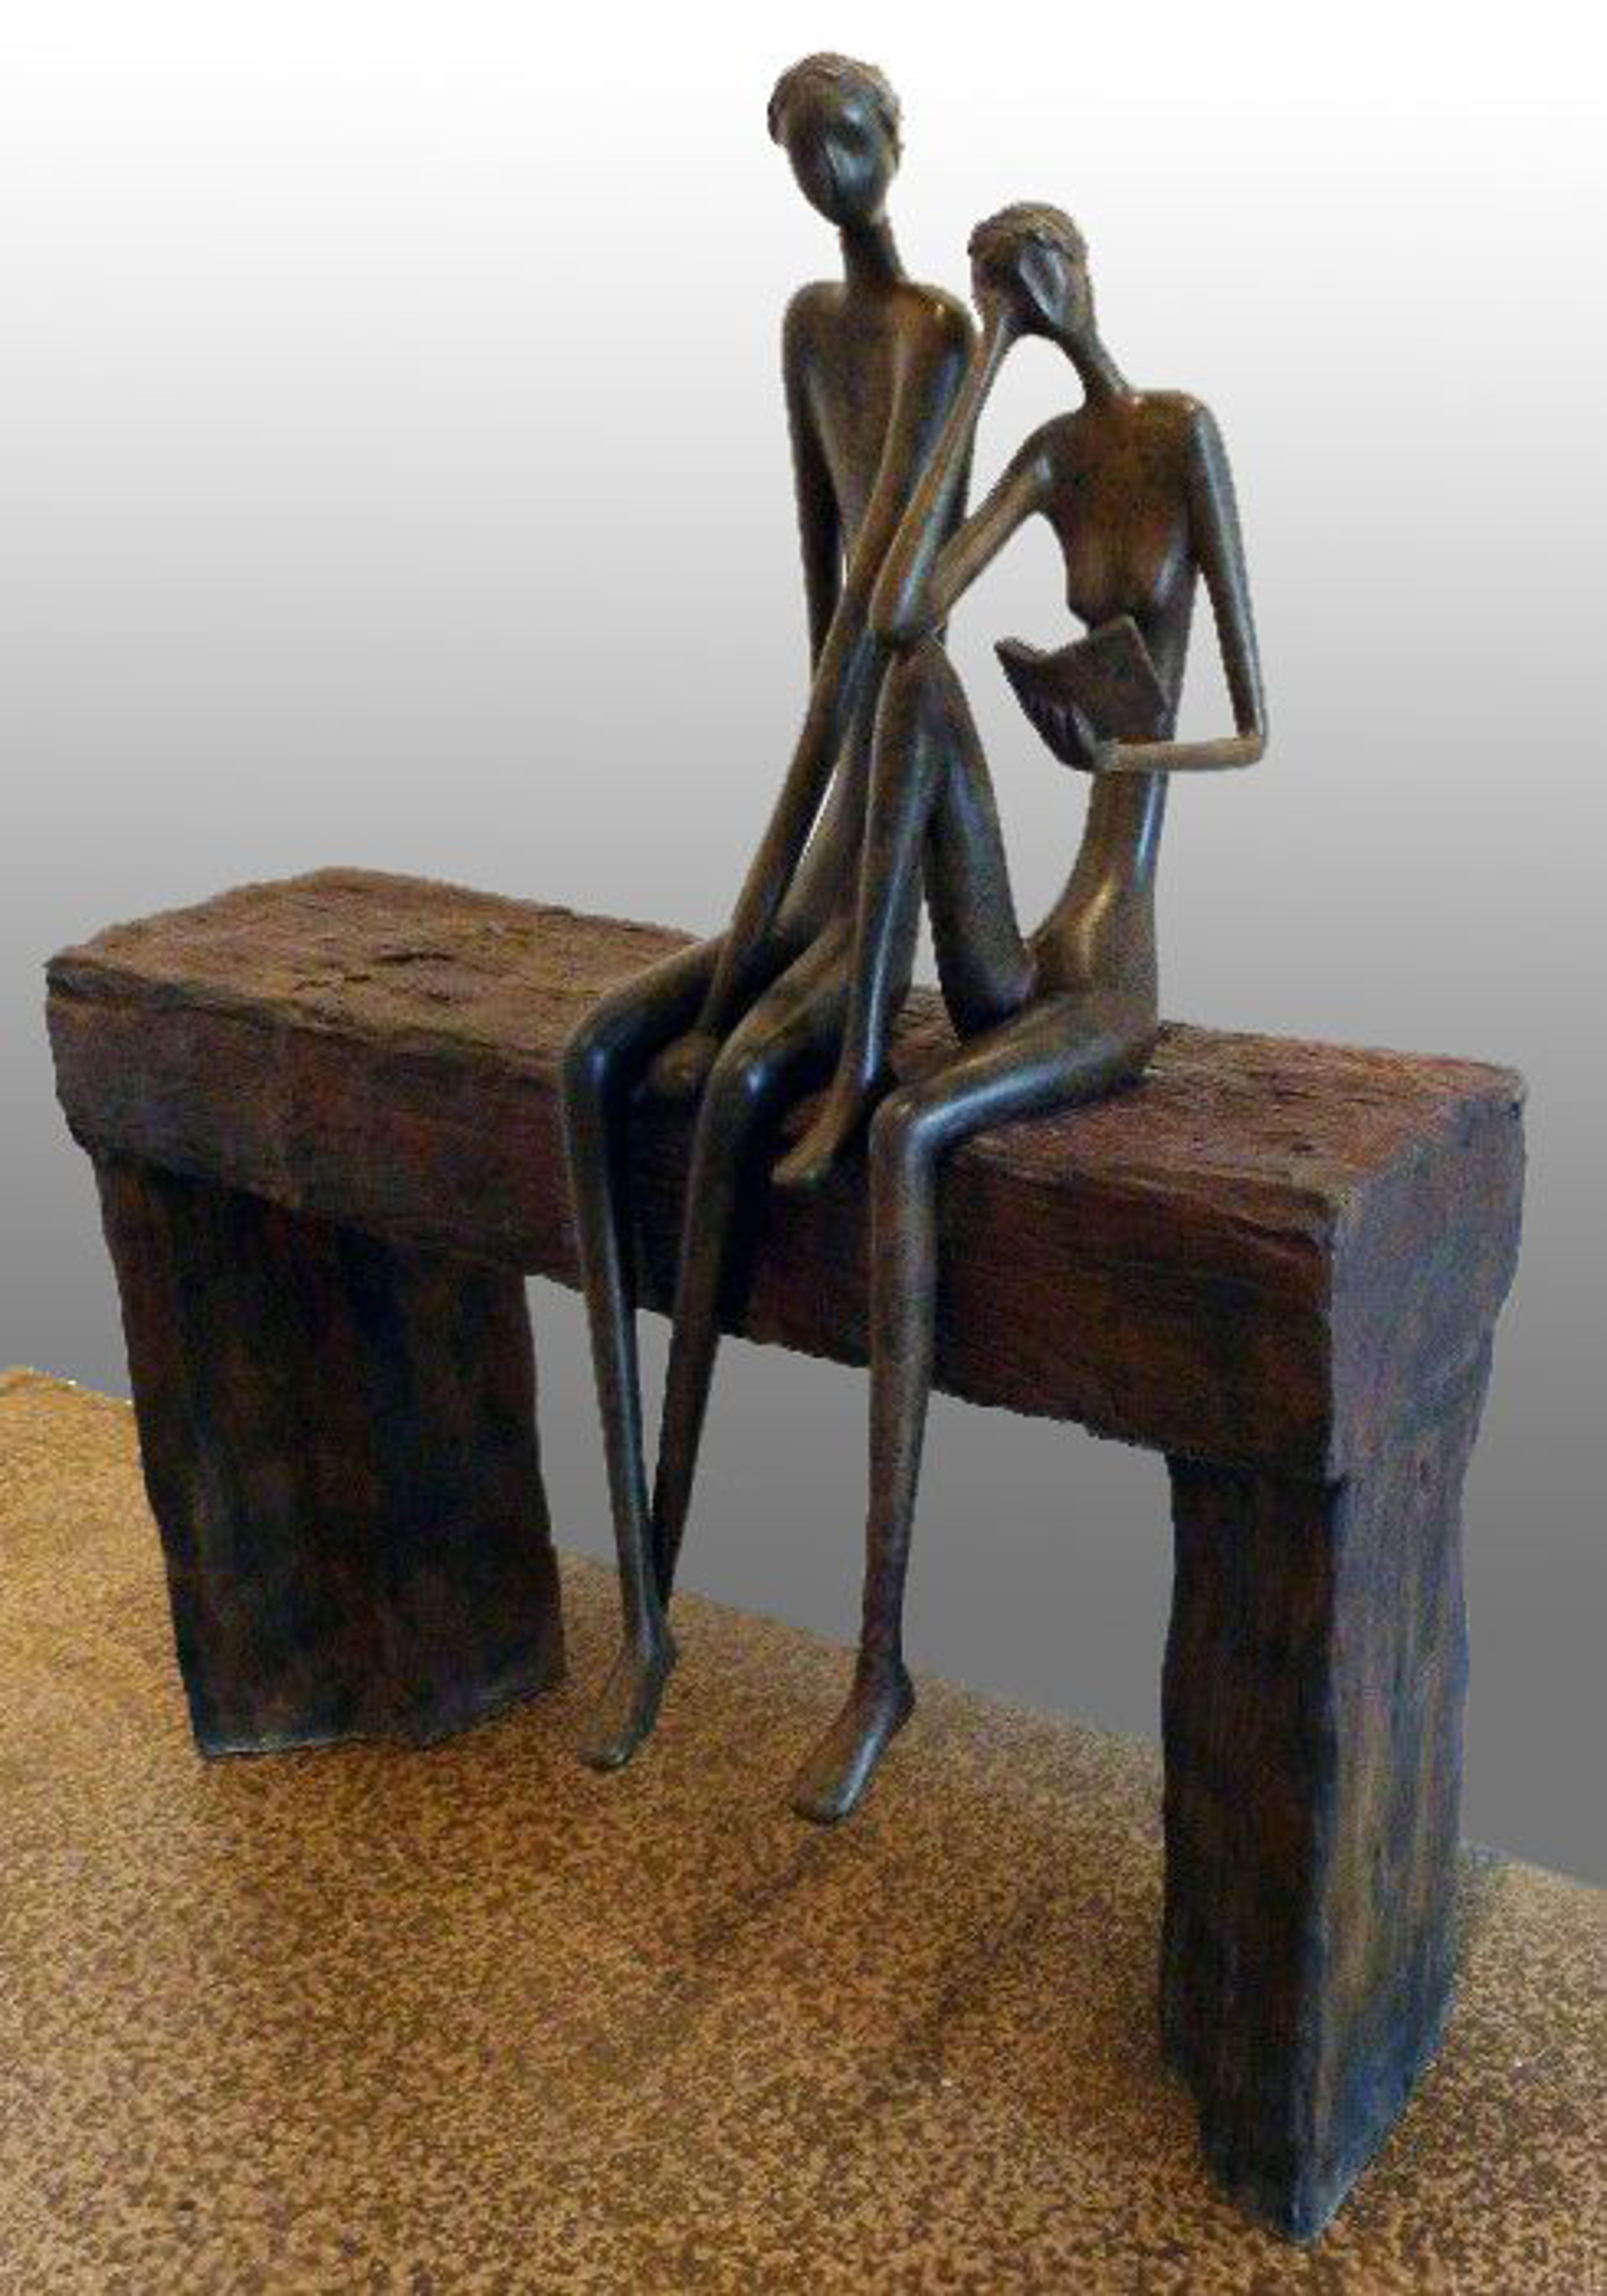 Couple on Bench by Ruth Bloch